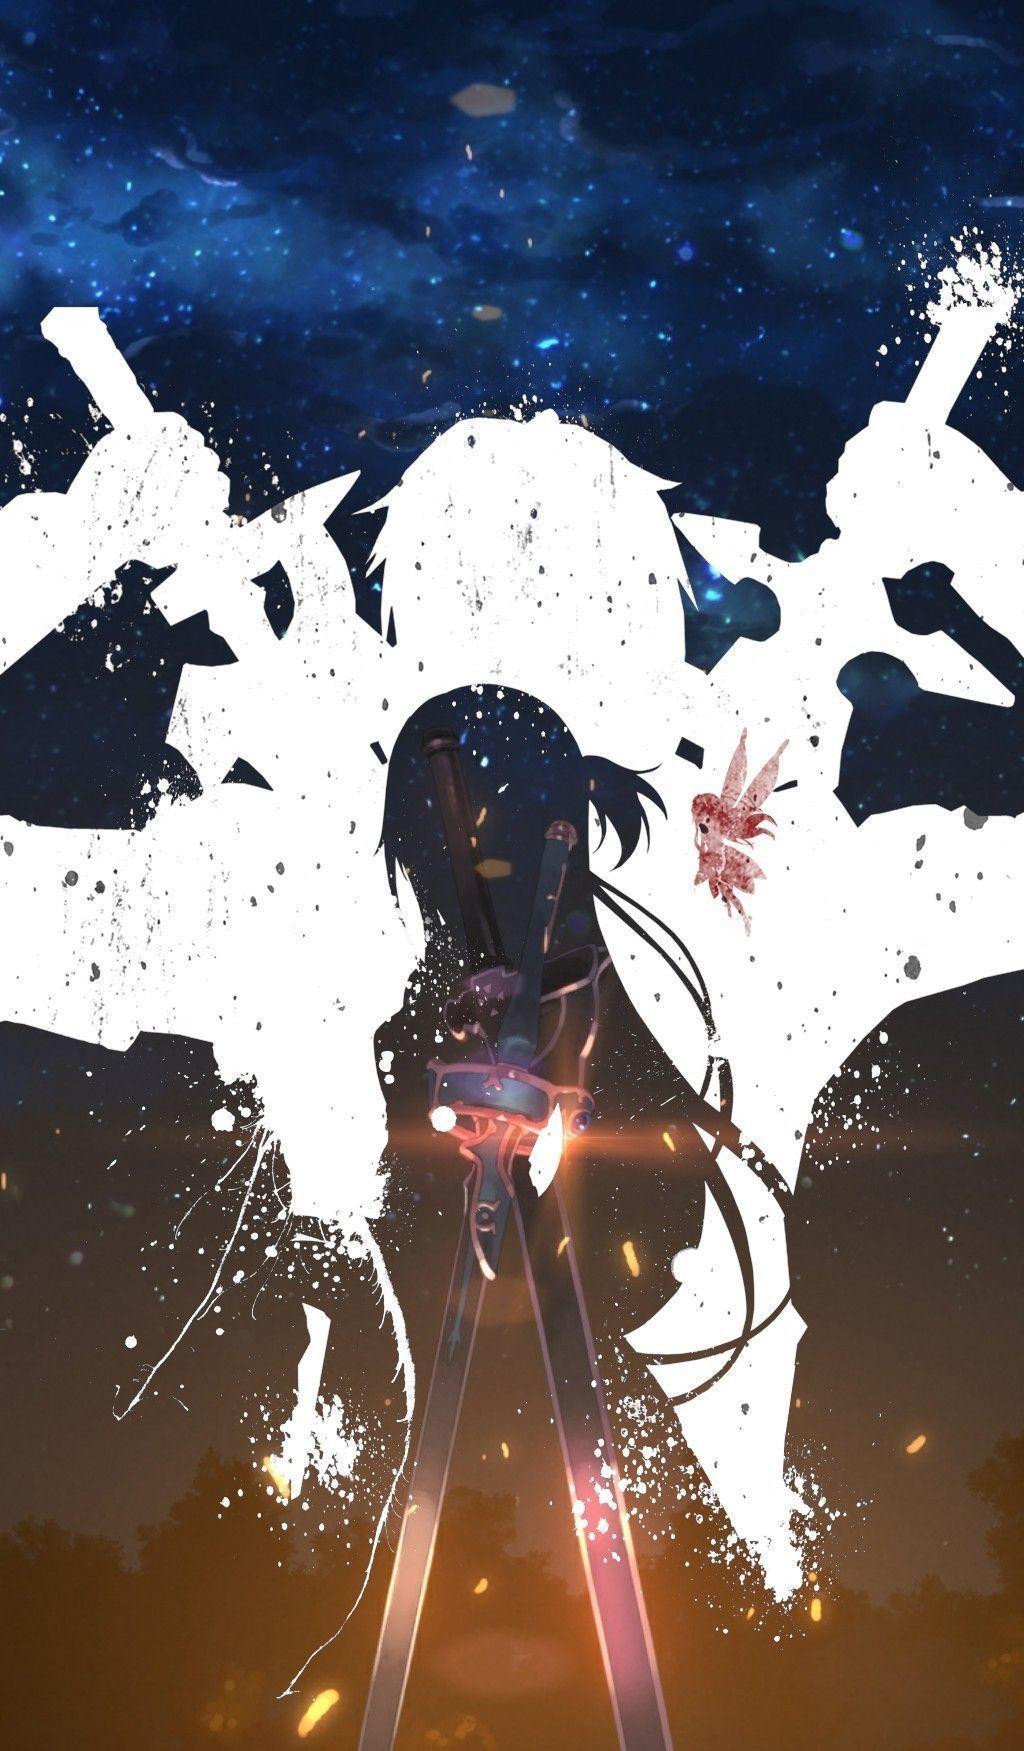 Anime Sword Art Online HD Wall APK for Android Download